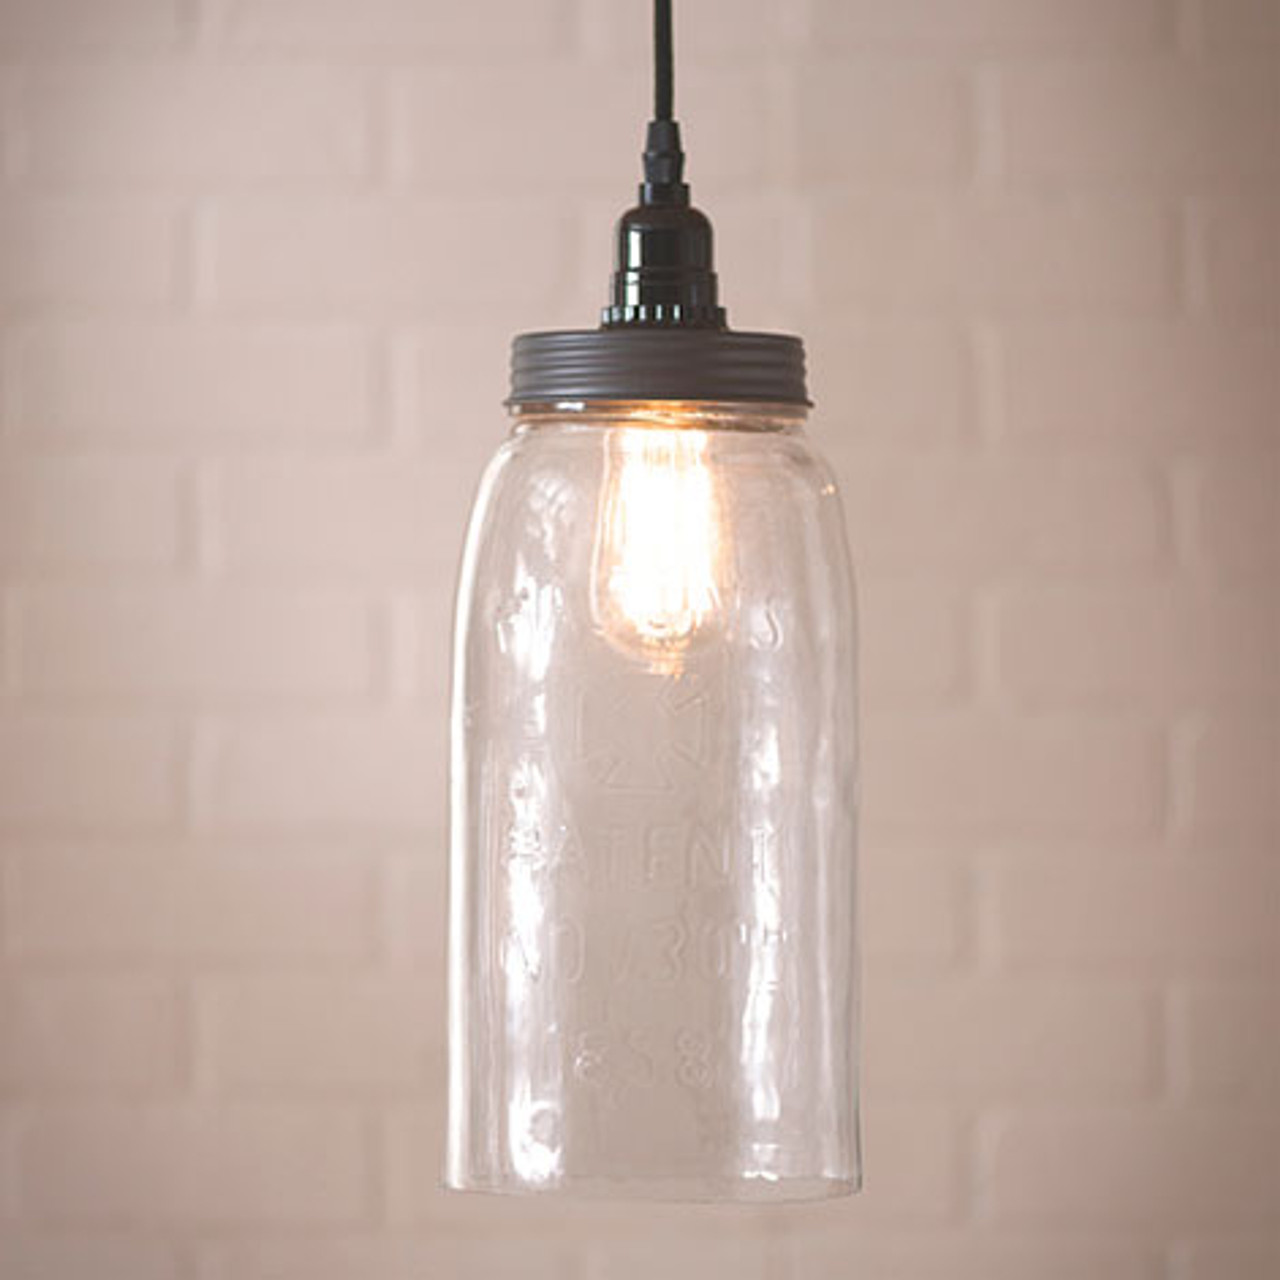 Mixing Modern and Traditional: Rustic Farmhouse Lighting & Chandeliers in Contemporary Homes 2